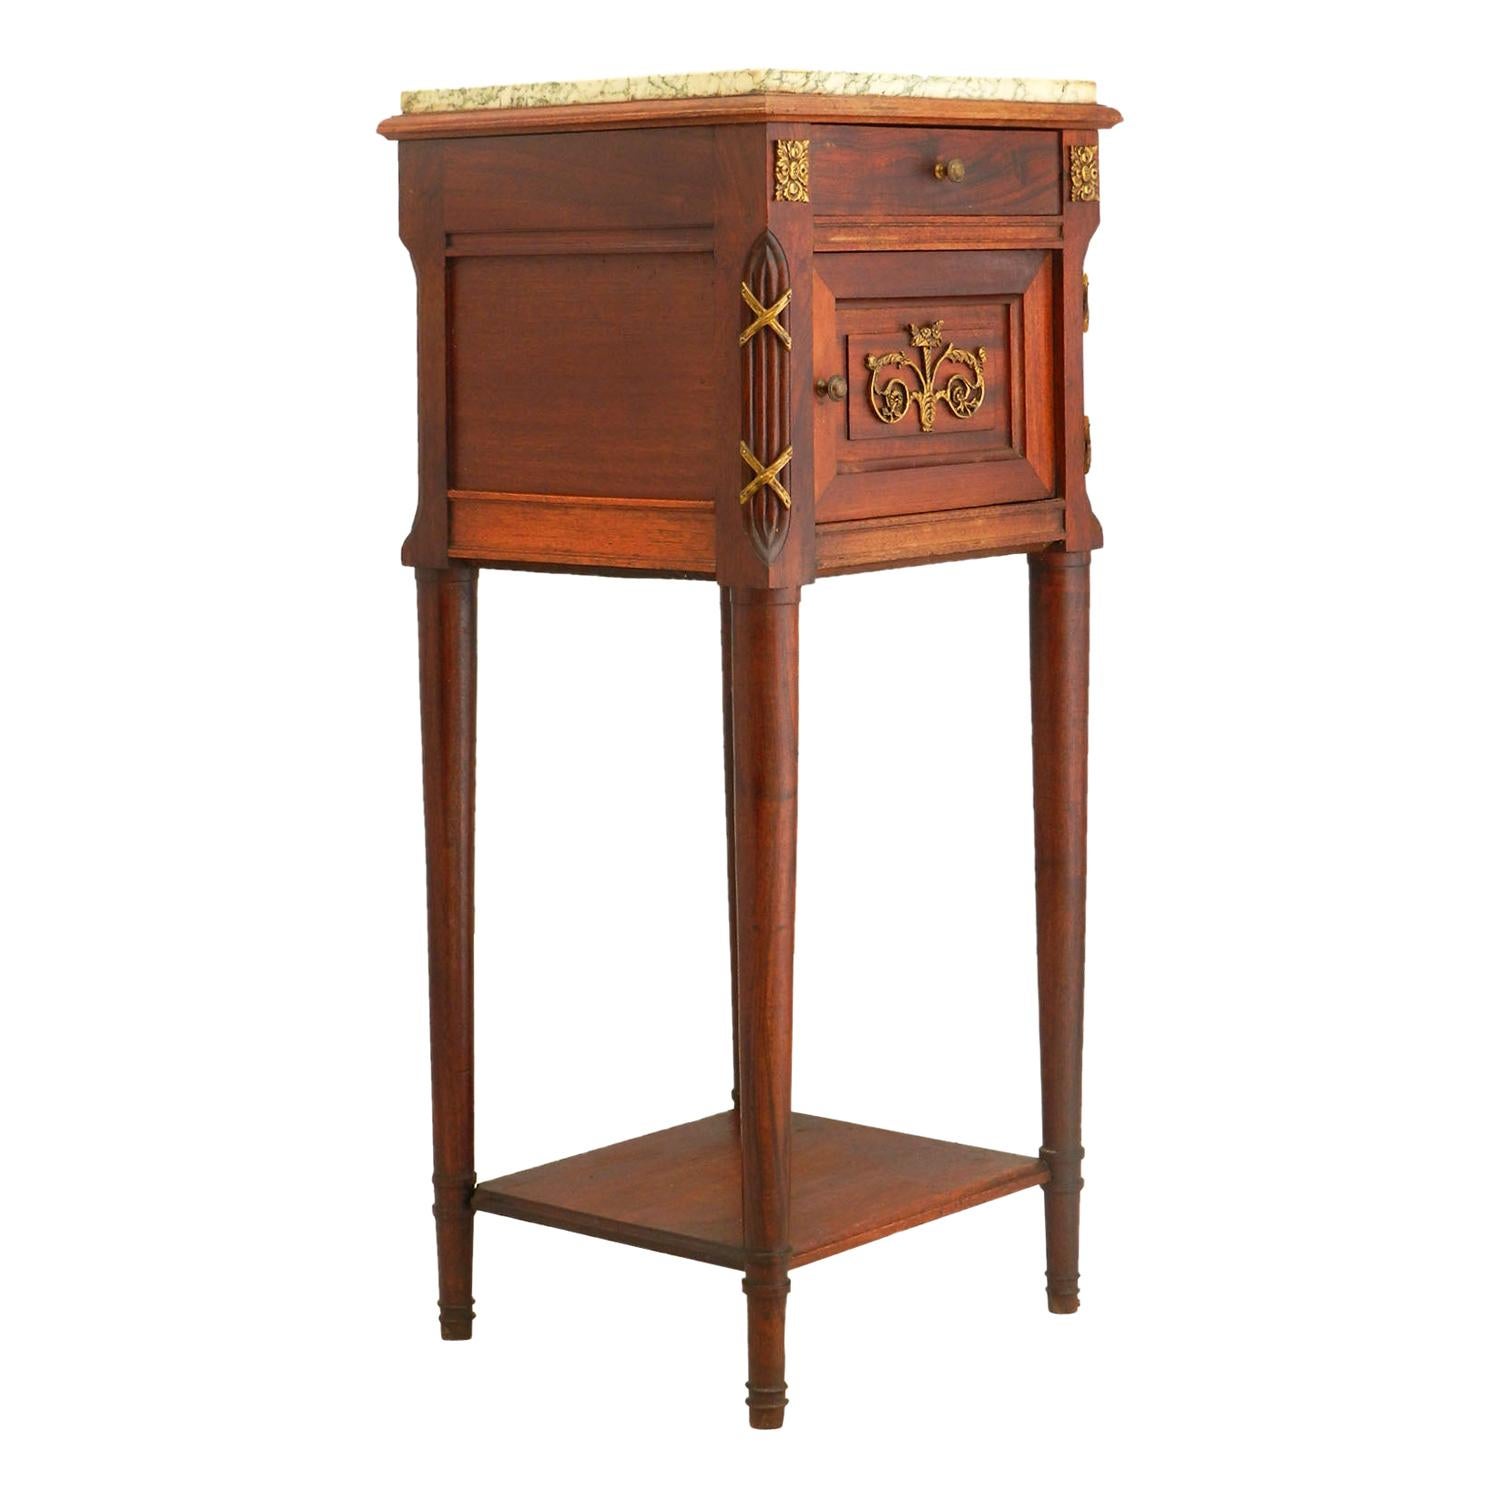 French Side Cabinet Nightstand Bedside Table Late 19th Century Louis XVI